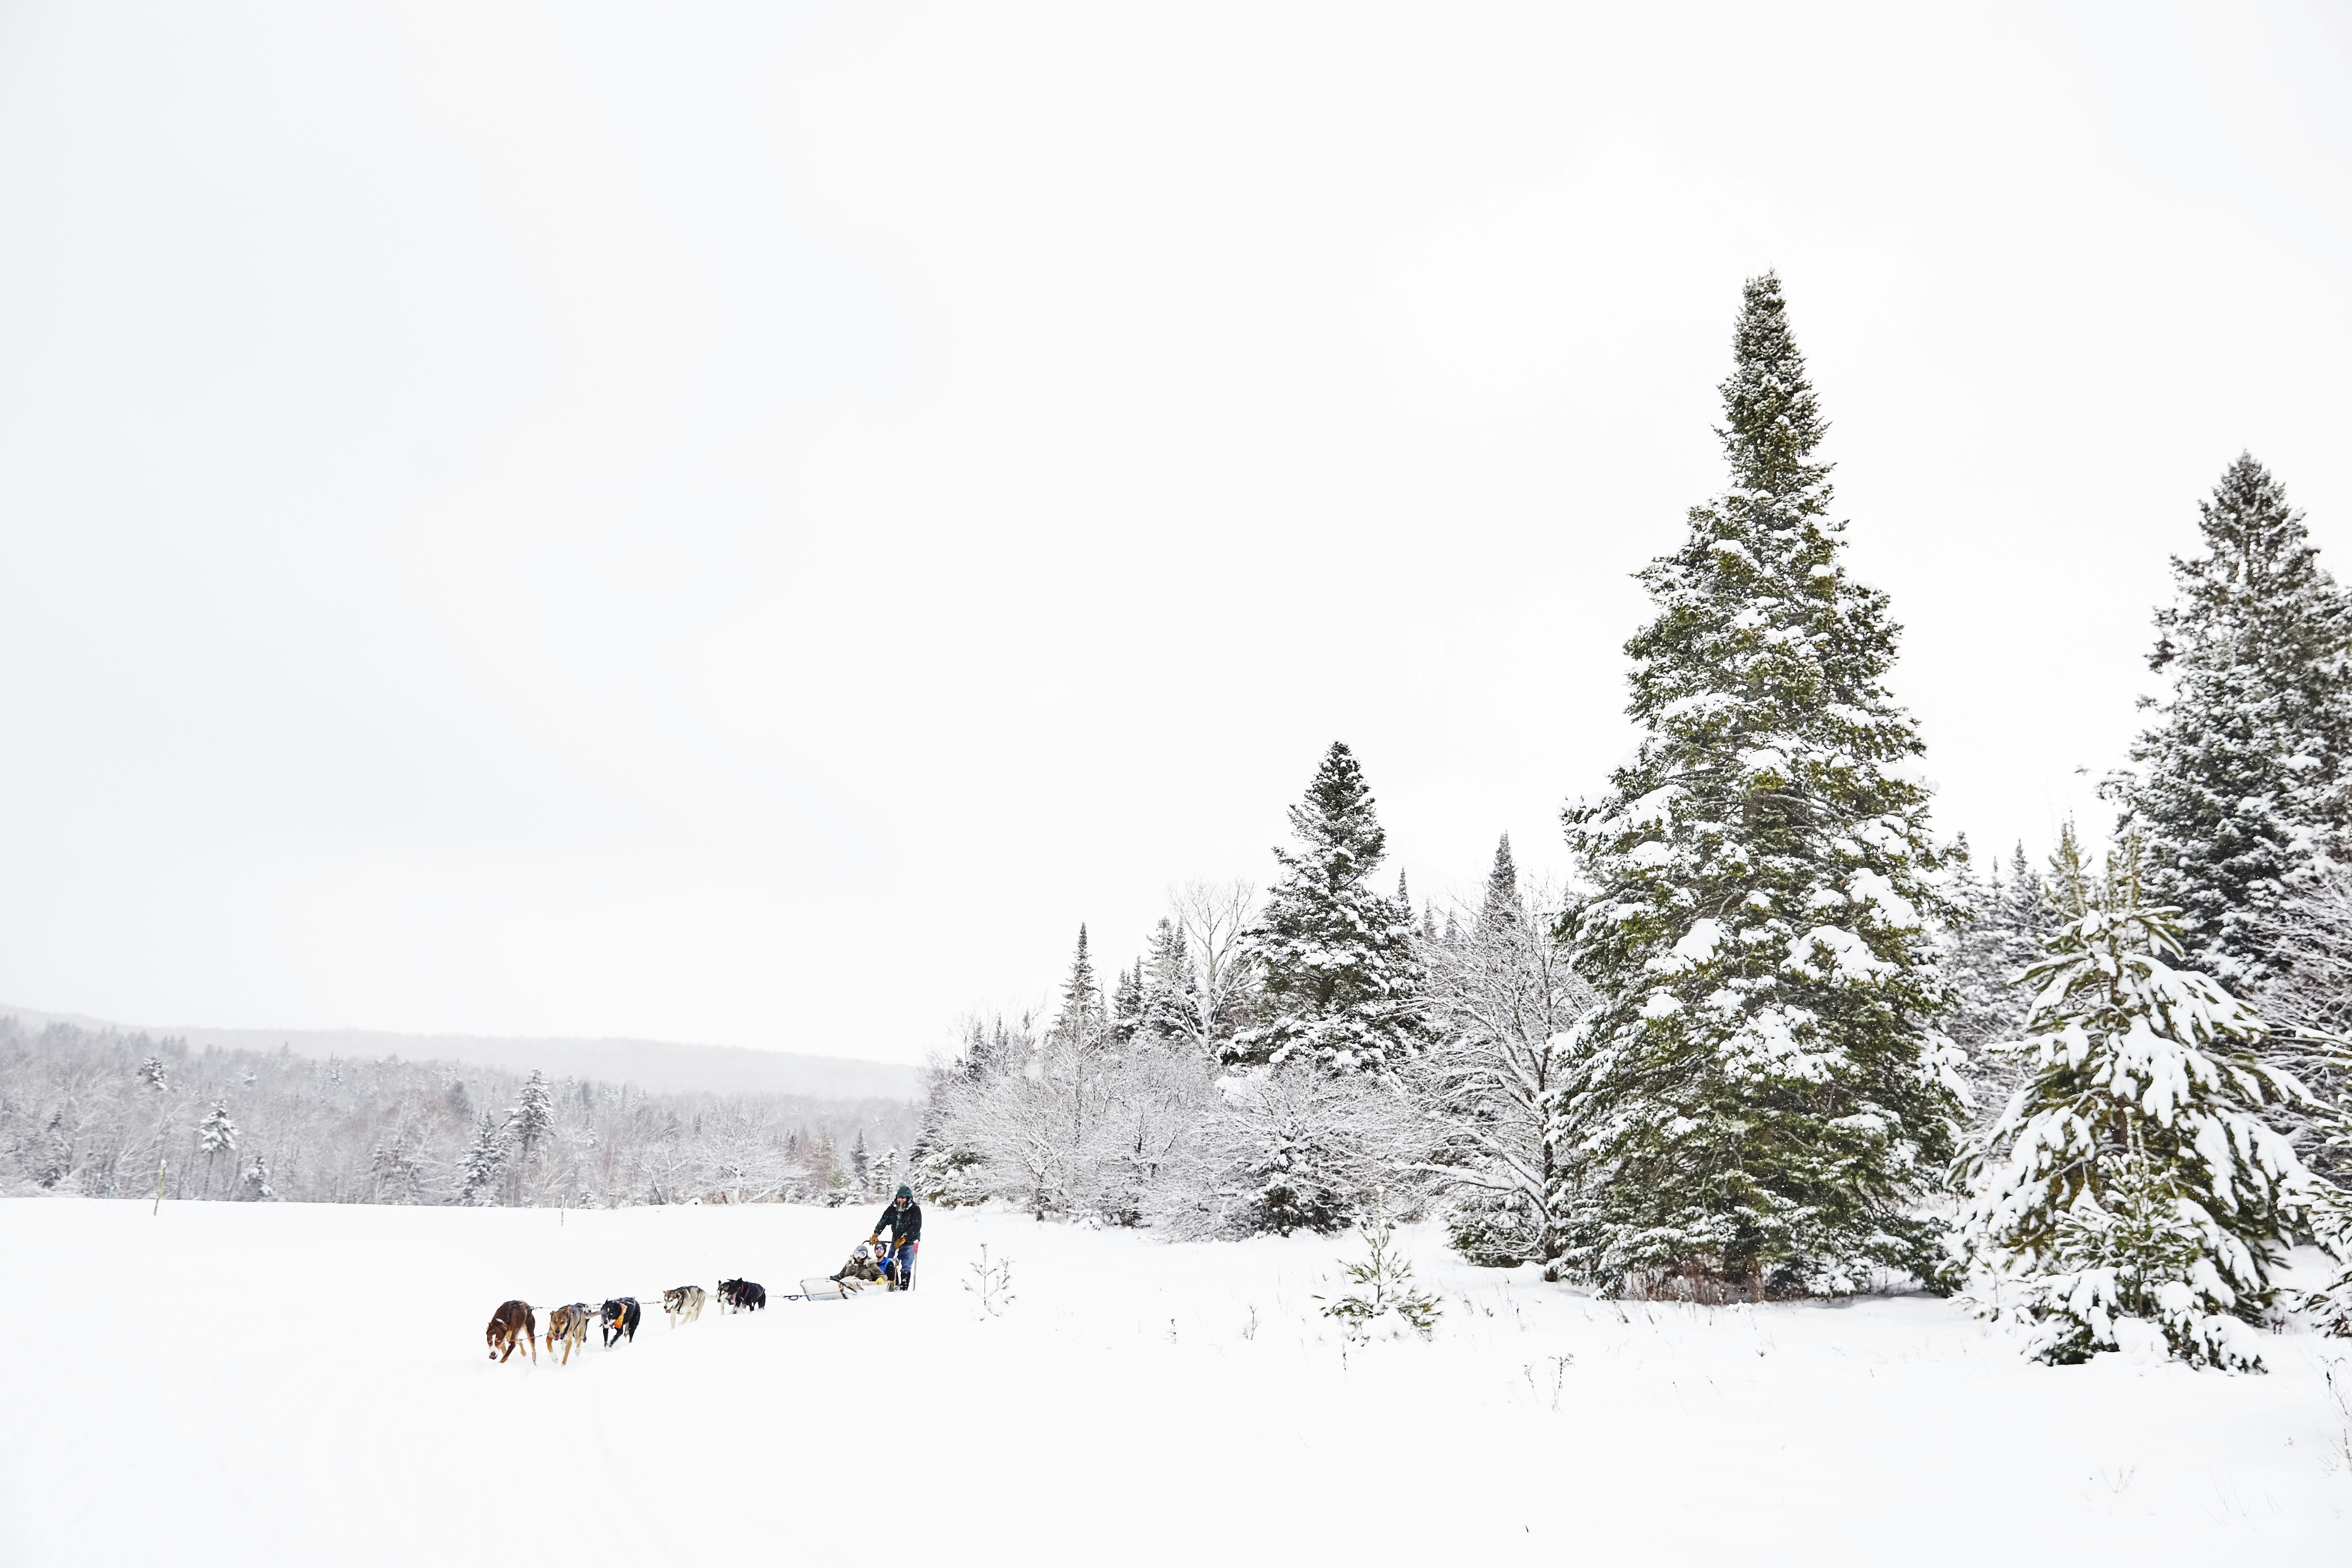 A dog-pulled sled in the middle of a wintery forest